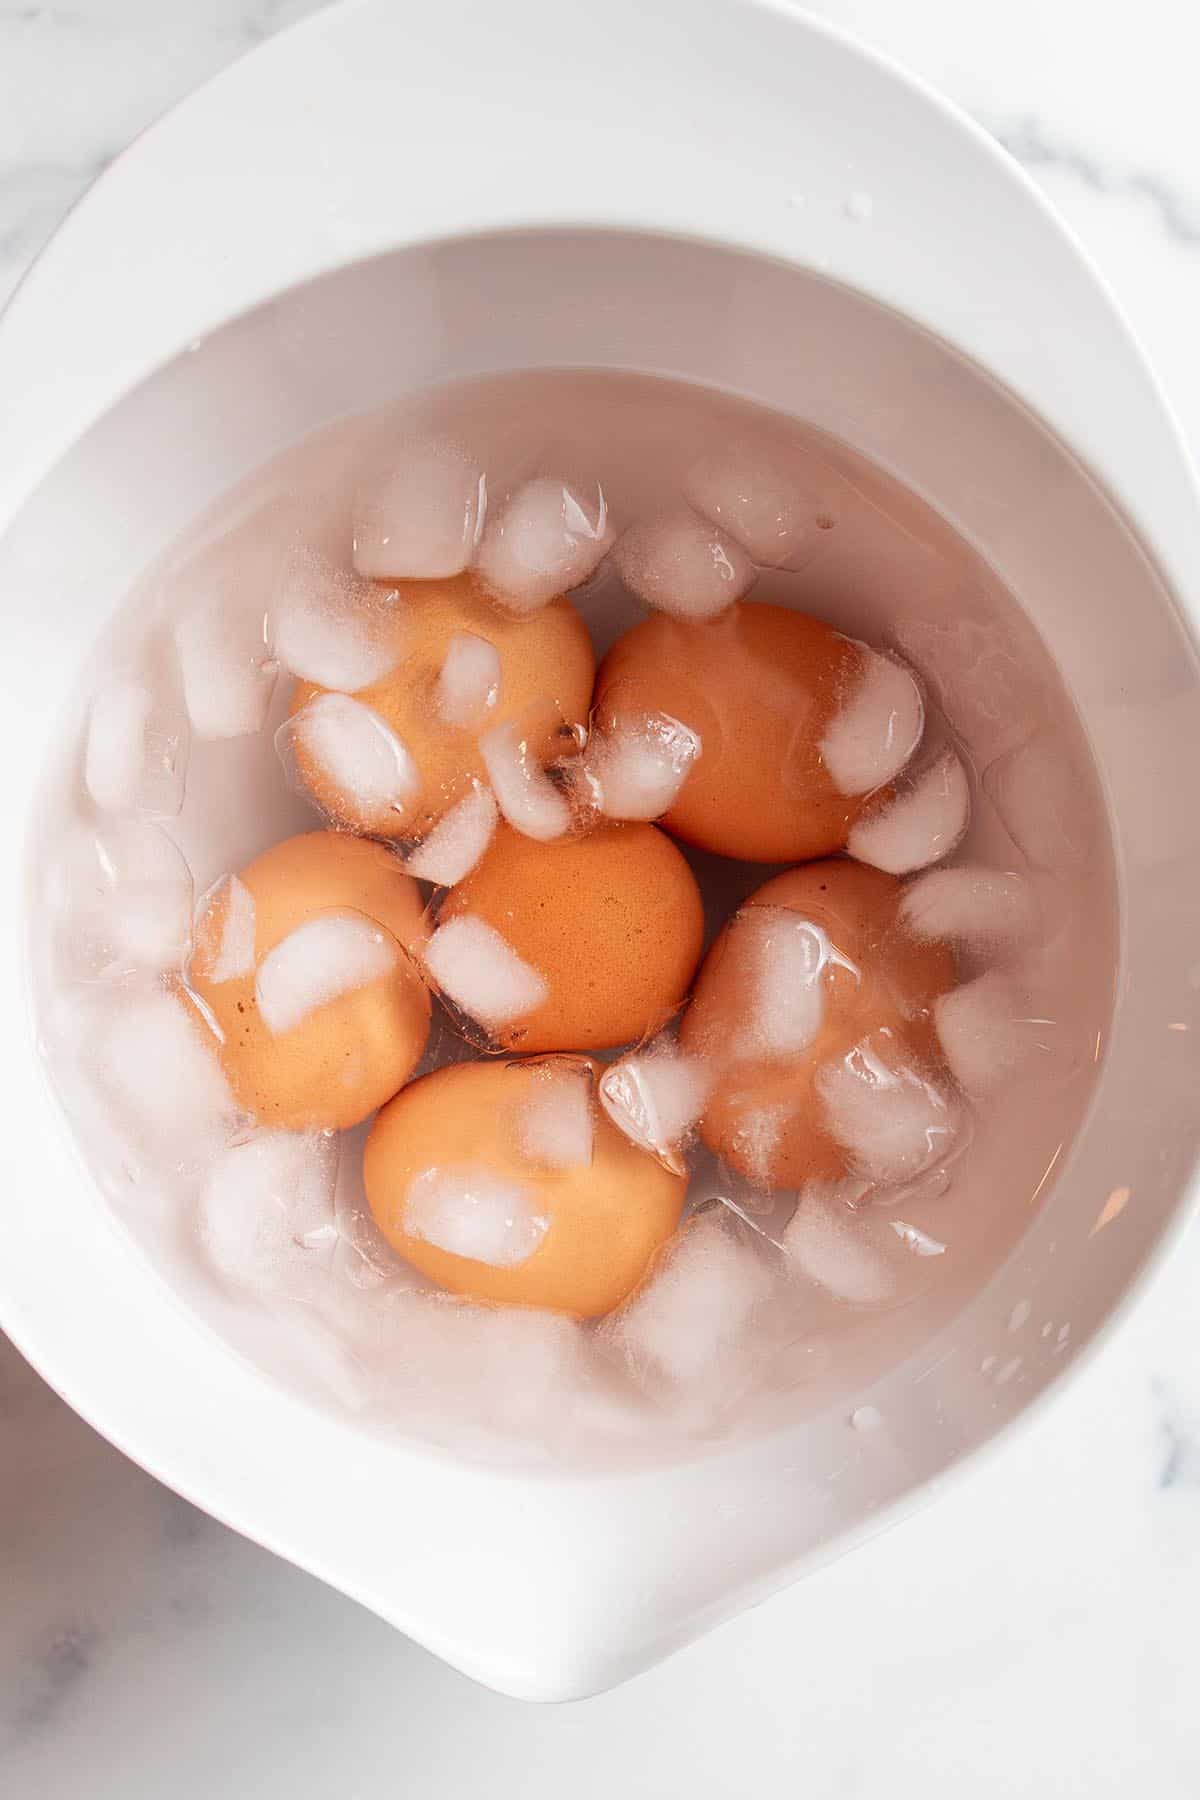 Brown eggs in a bowl of water and ice.